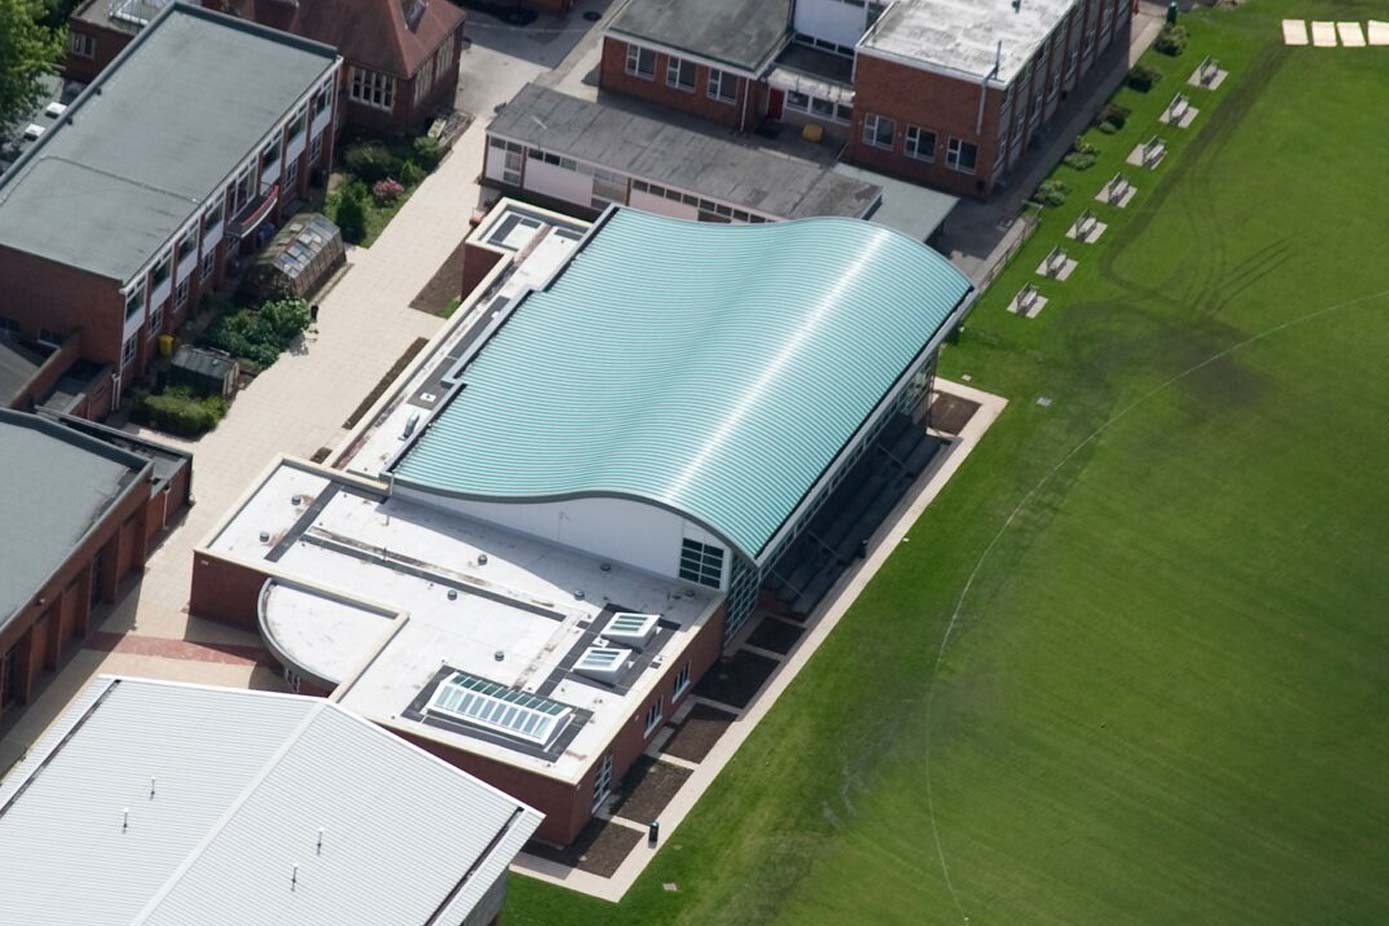 The roof of a school